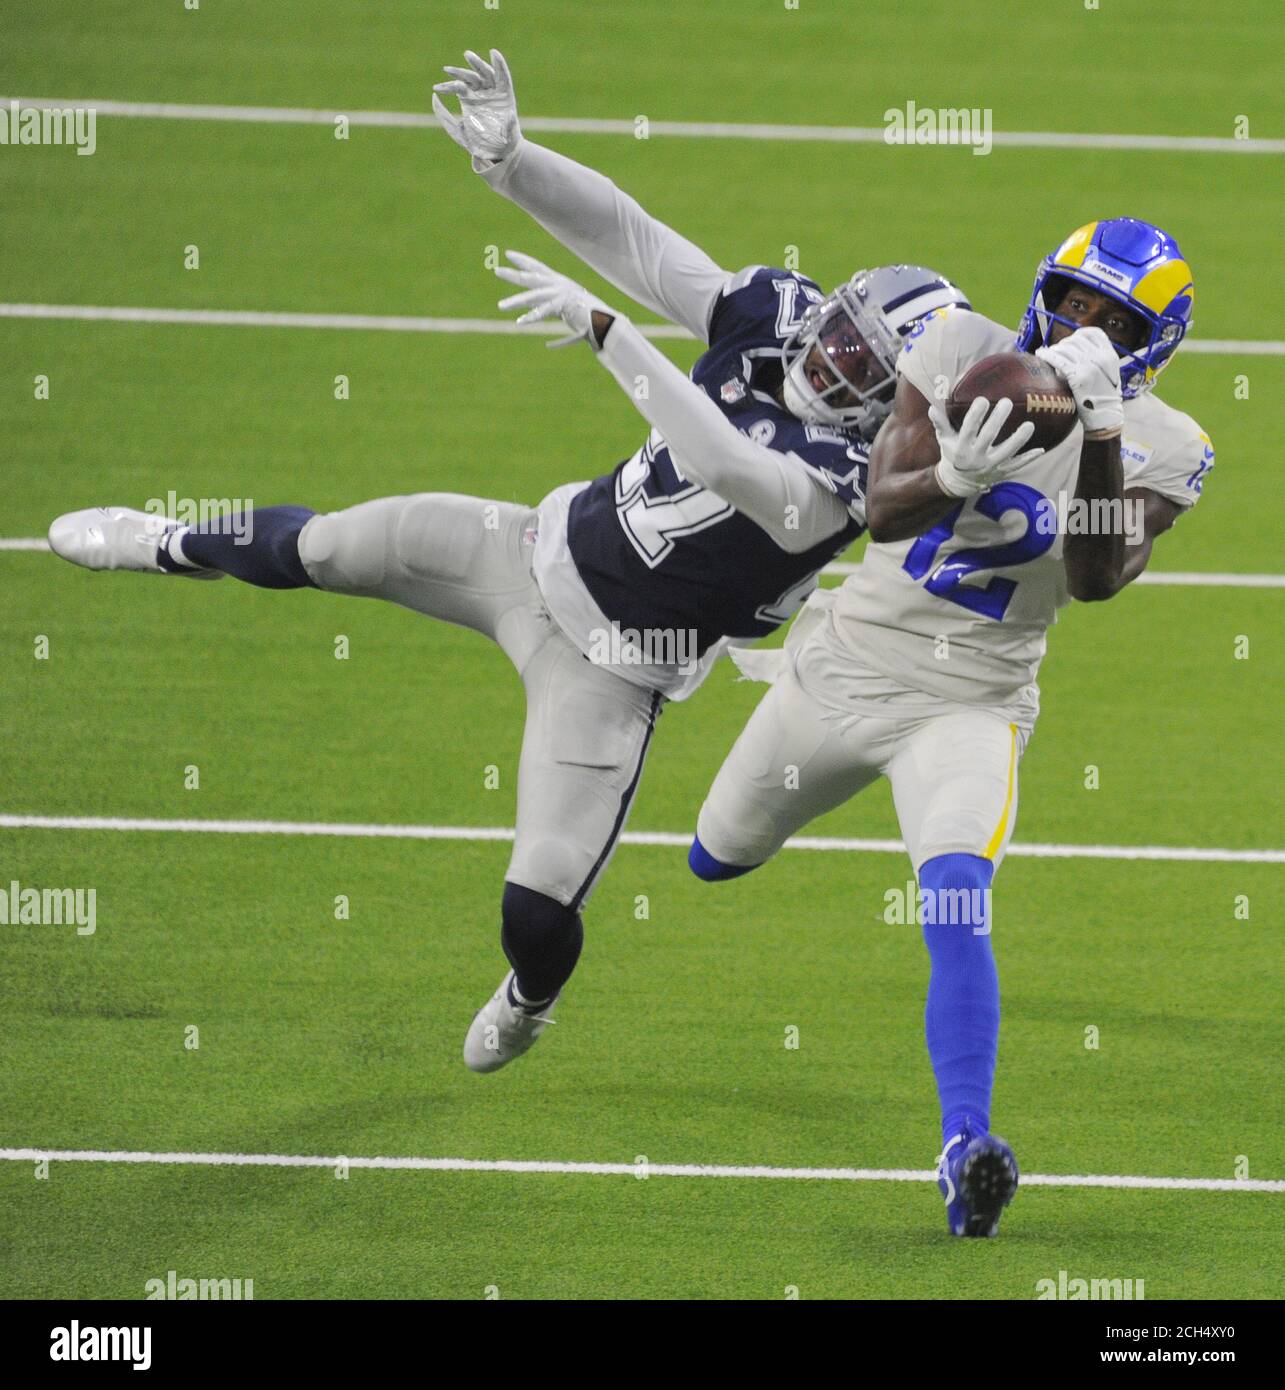 Inglewood, United States. 13th Sep, 2020. Los Angeles Rams' Van Jefferson catches a long pass over Dallas Cowboys' Trevon Diggs in the first half at SoFi Stadium in Inglewood, California on Sunday, September 13, 2020. Photo by Lori Shepler/UPI Credit: UPI/Alamy Live News Stock Photo